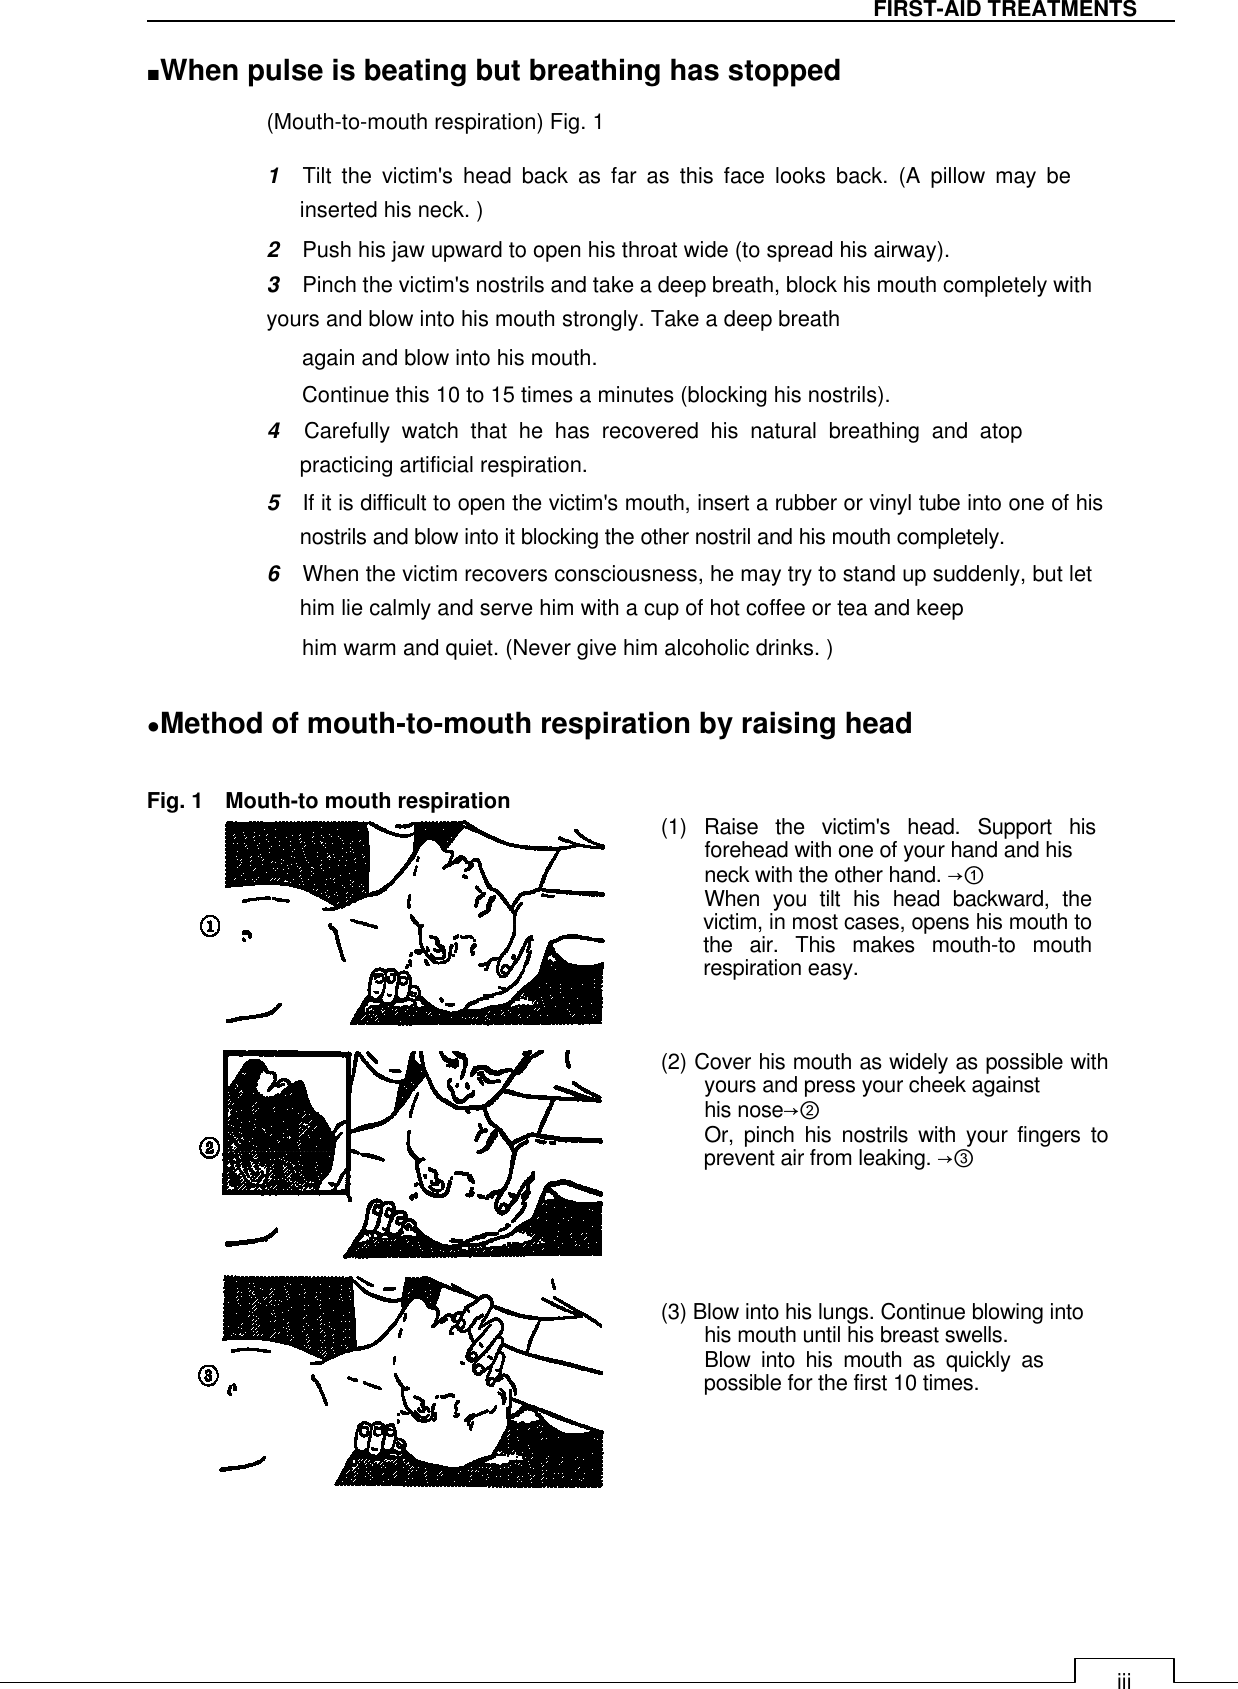   iii FIRST-AID TREATMENTS ■When pulse is beating but breathing has stopped   (Mouth-to-mouth respiration) Fig. 1   1    Tilt  the  victim&apos;s  head  back  as  far  as  this  face  looks  back.  (A  pillow  may  be inserted his neck. )  2    Push his jaw upward to open his throat wide (to spread his airway).  3    Pinch the victim&apos;s nostrils and take a deep breath, block his mouth completely with yours and blow into his mouth strongly. Take a deep breath  again and blow into his mouth.  Continue this 10 to 15 times a minutes (blocking his nostrils).  4    Carefully  watch  that  he  has  recovered  his  natural  breathing  and  atop practicing artificial respiration.  5    If it is difficult to open the victim&apos;s mouth, insert a rubber or vinyl tube into one of his nostrils and blow into it blocking the other nostril and his mouth completely.  6    When the victim recovers consciousness, he may try to stand up suddenly, but let him lie calmly and serve him with a cup of hot coffee or tea and keep  him warm and quiet. (Never give him alcoholic drinks. )   ●Method of mouth-to-mouth respiration by raising head    Fig. 1    Mouth-to mouth respiration  (1)  Raise  the  victim&apos;s  head.  Support  his forehead with one of your hand and his  neck with the other hand. →① When  you  tilt  his  head  backward,  the victim, in most cases, opens his mouth to the  air.  This  makes  mouth-to  mouth respiration easy.     (2) Cover his mouth as widely as possible with yours and press your cheek against  his nose→② Or,  pinch  his  nostrils  with  your  fingers  to prevent air from leaking. →③       (3) Blow into his lungs. Continue blowing into his mouth until his breast swells.  Blow  into  his  mouth  as  quickly  as possible for the first 10 times.        